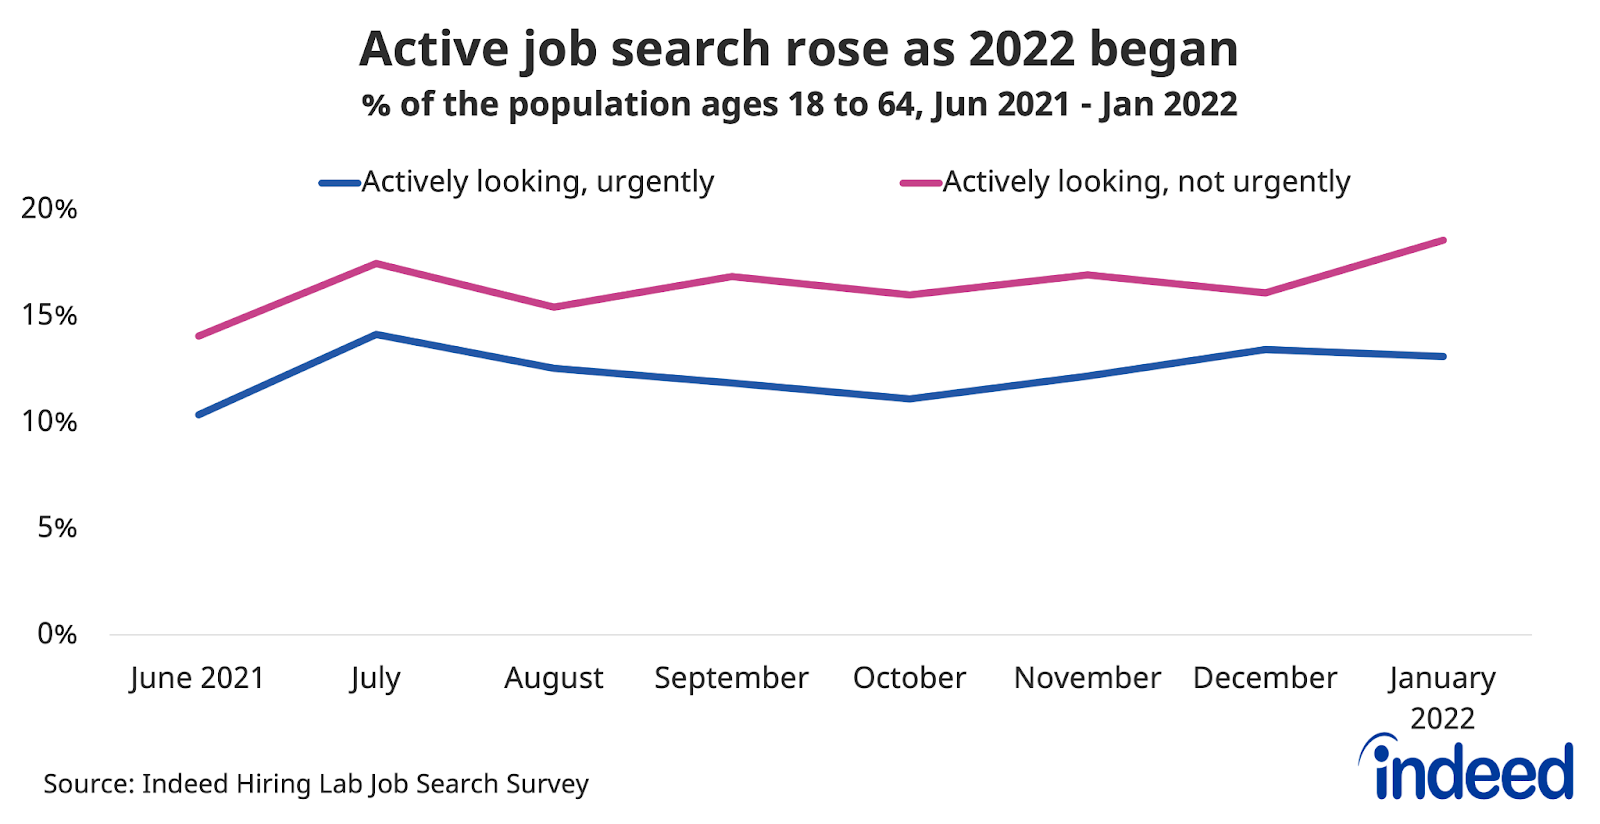 Line chart titled “Active job search rose as 2022 began in January.”